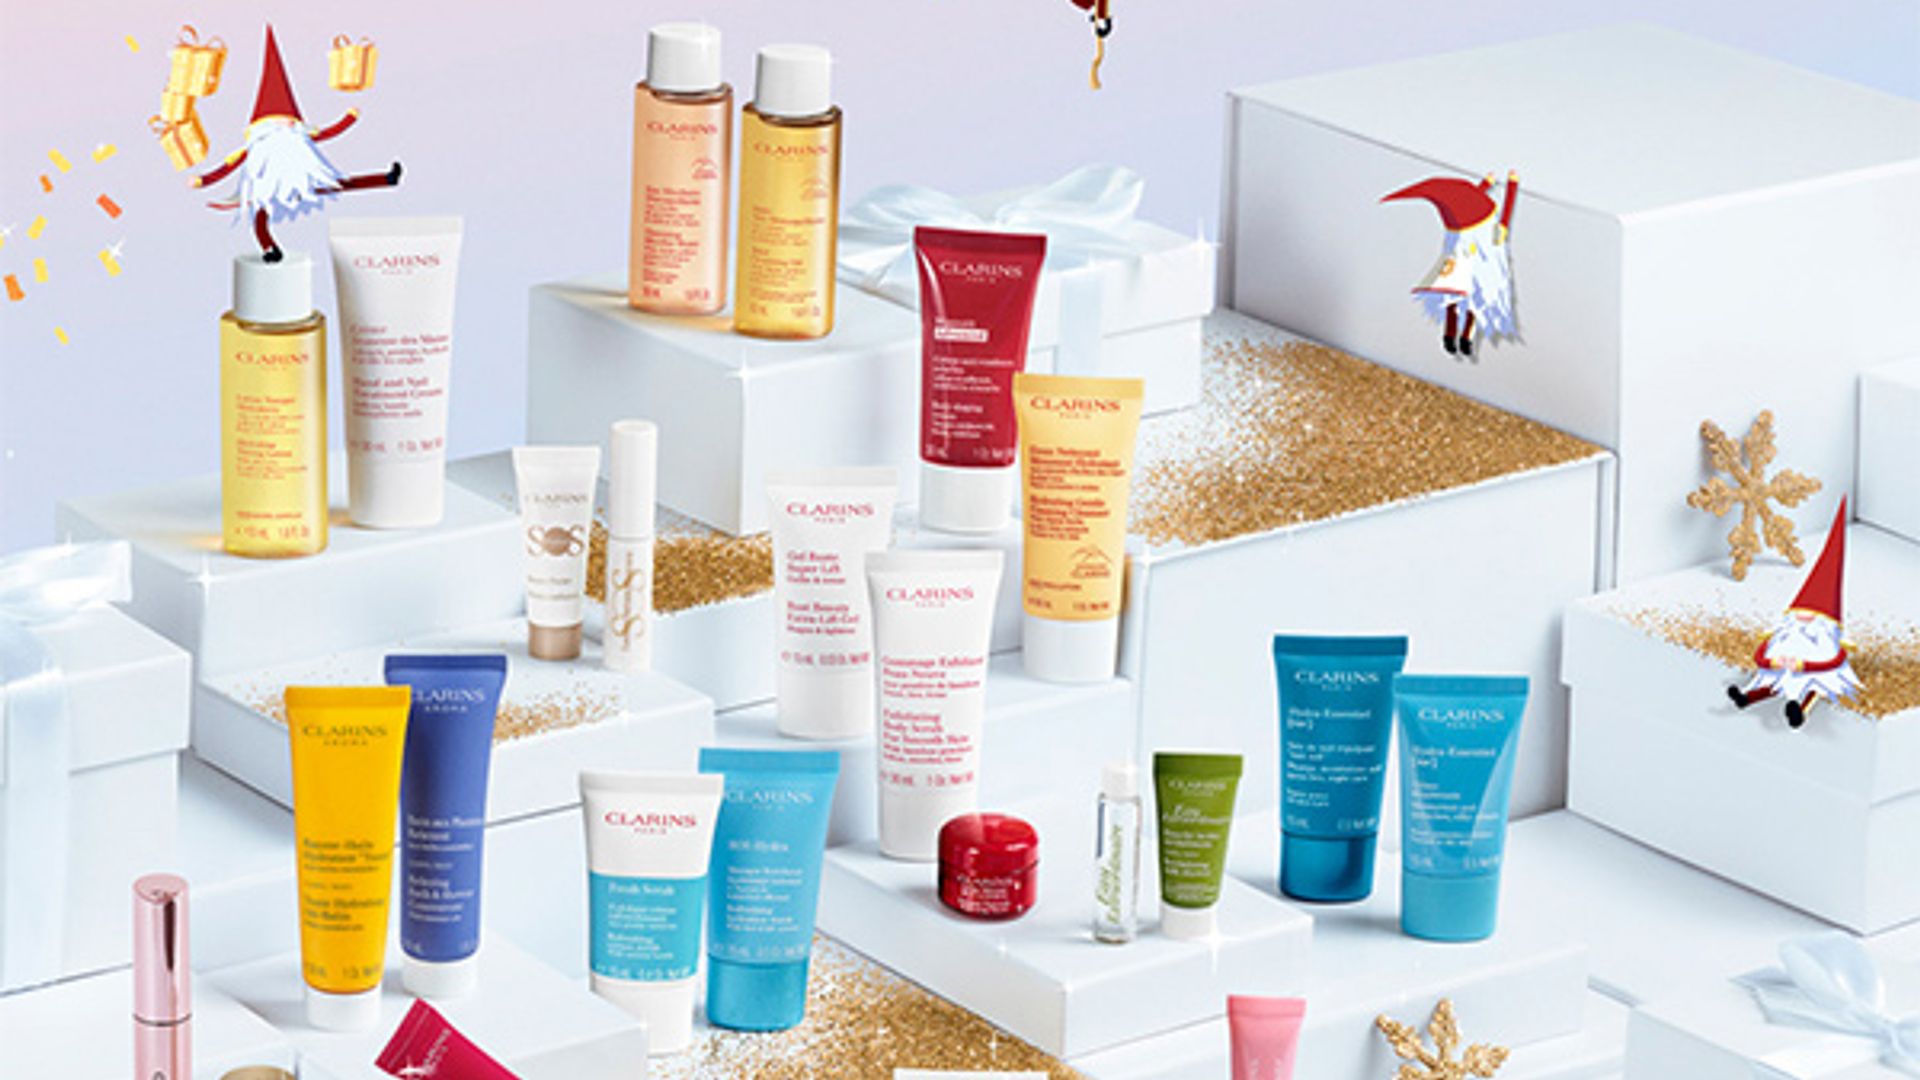 Clarins Christmas gifting and advent calendars